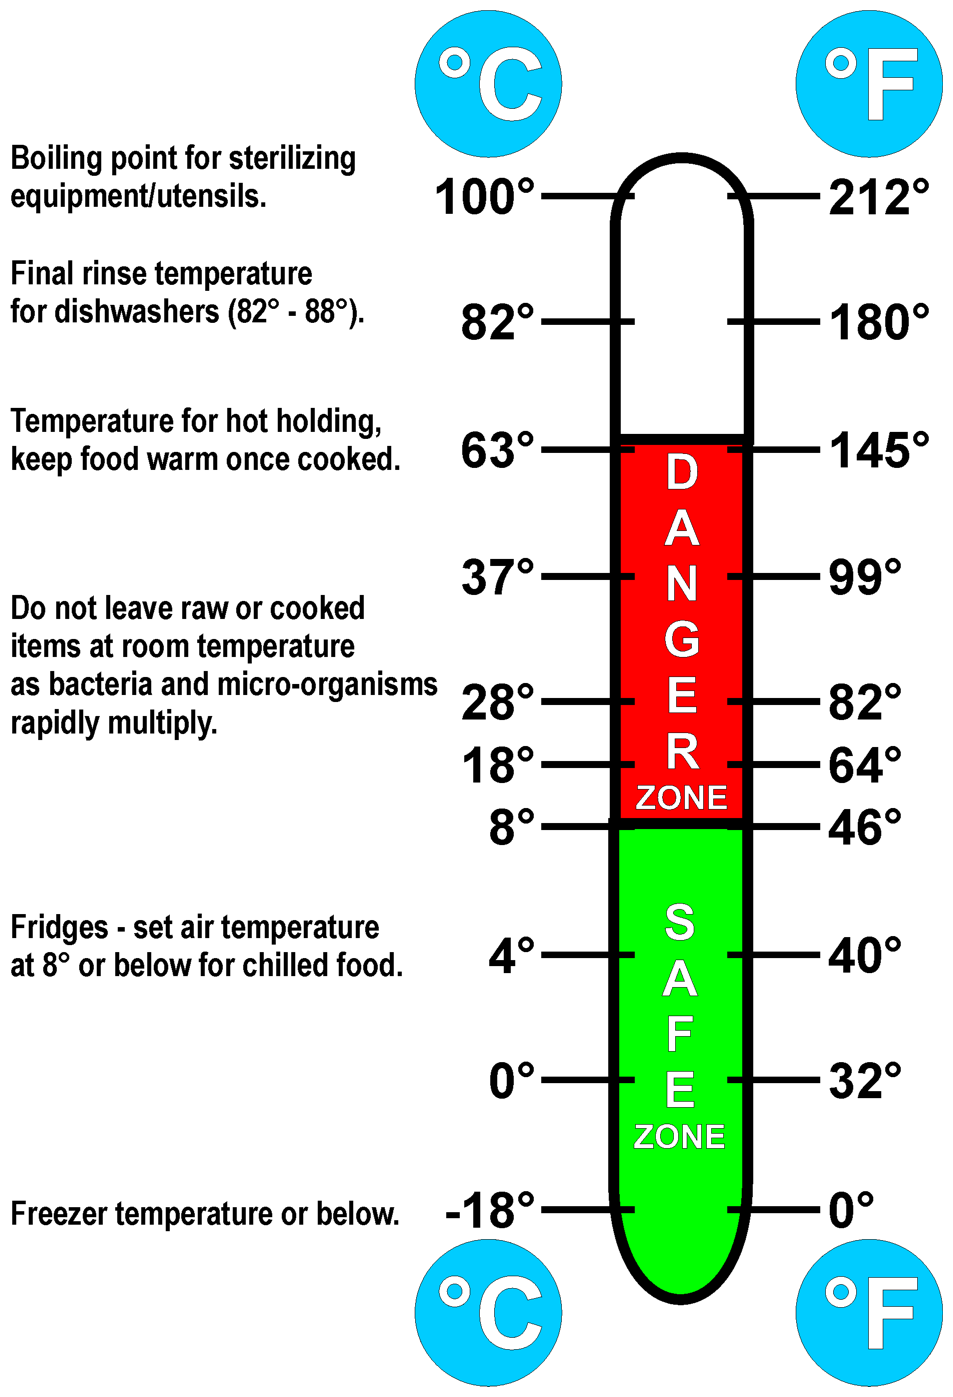 Safe cooler temperatures, C and F. Click here for a larger image that you can print from your browser.